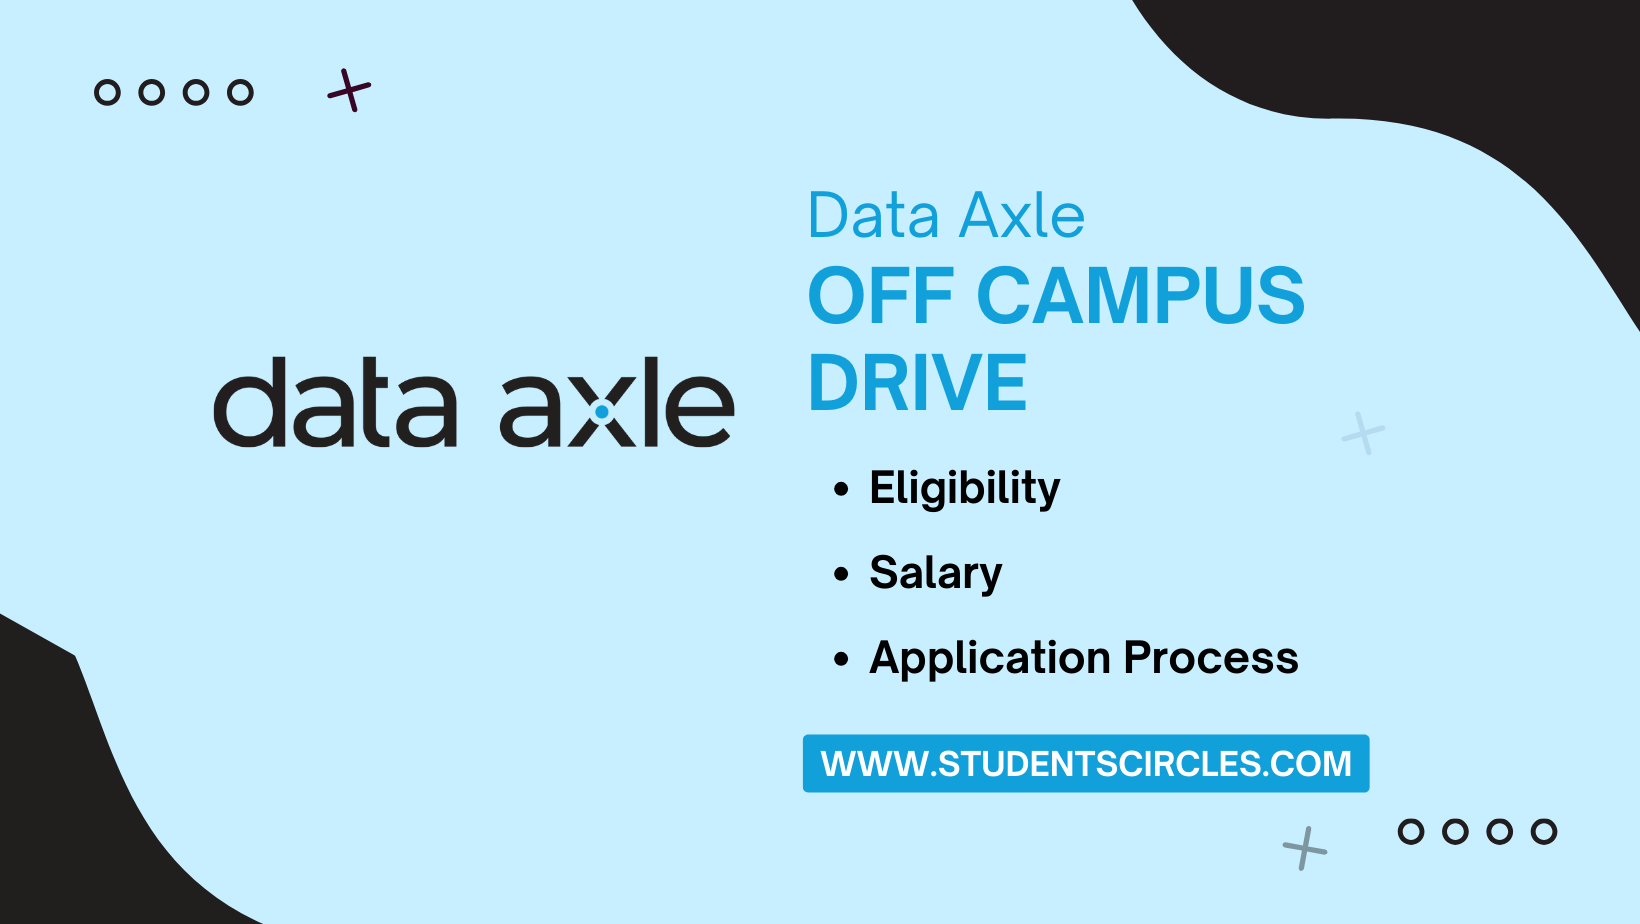 Data Axle Off Campus Drive